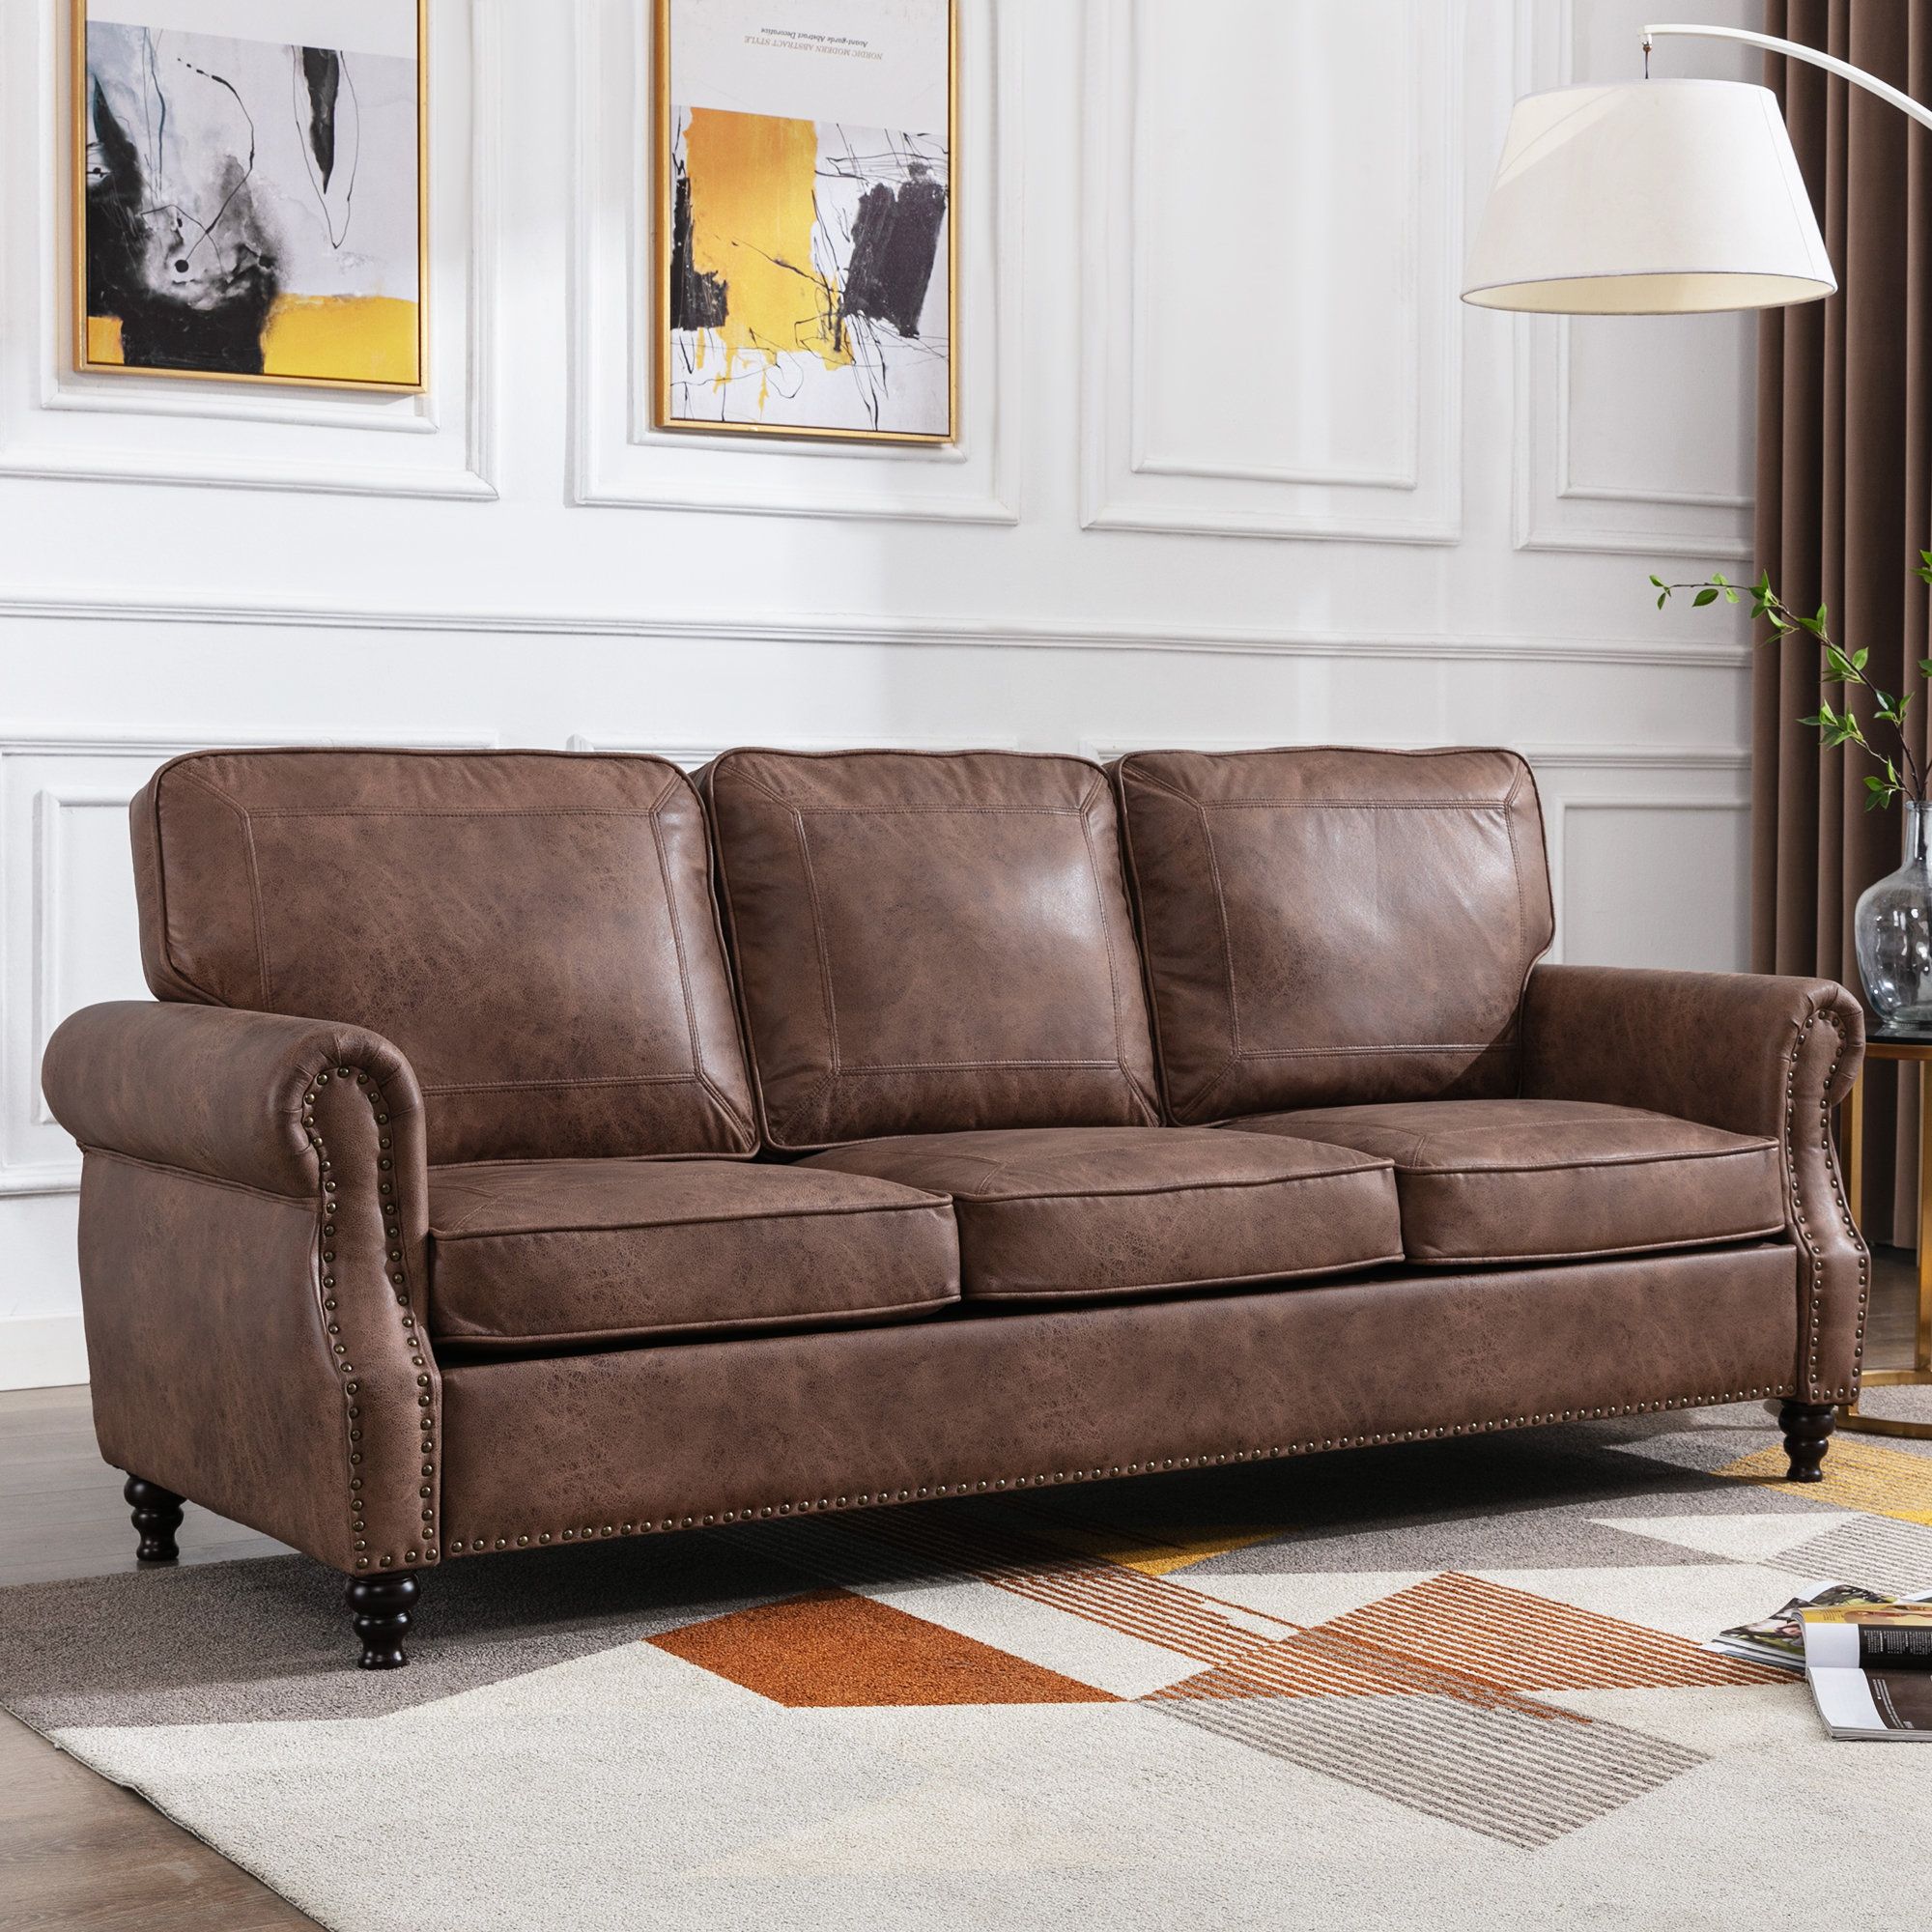 Lark Manor Amarius 80" Wide Faux Leather Rolled Arm Sofa & Reviews | Wayfair Pertaining To Faux Leather Sofas In Chocolate Brown (View 10 of 15)